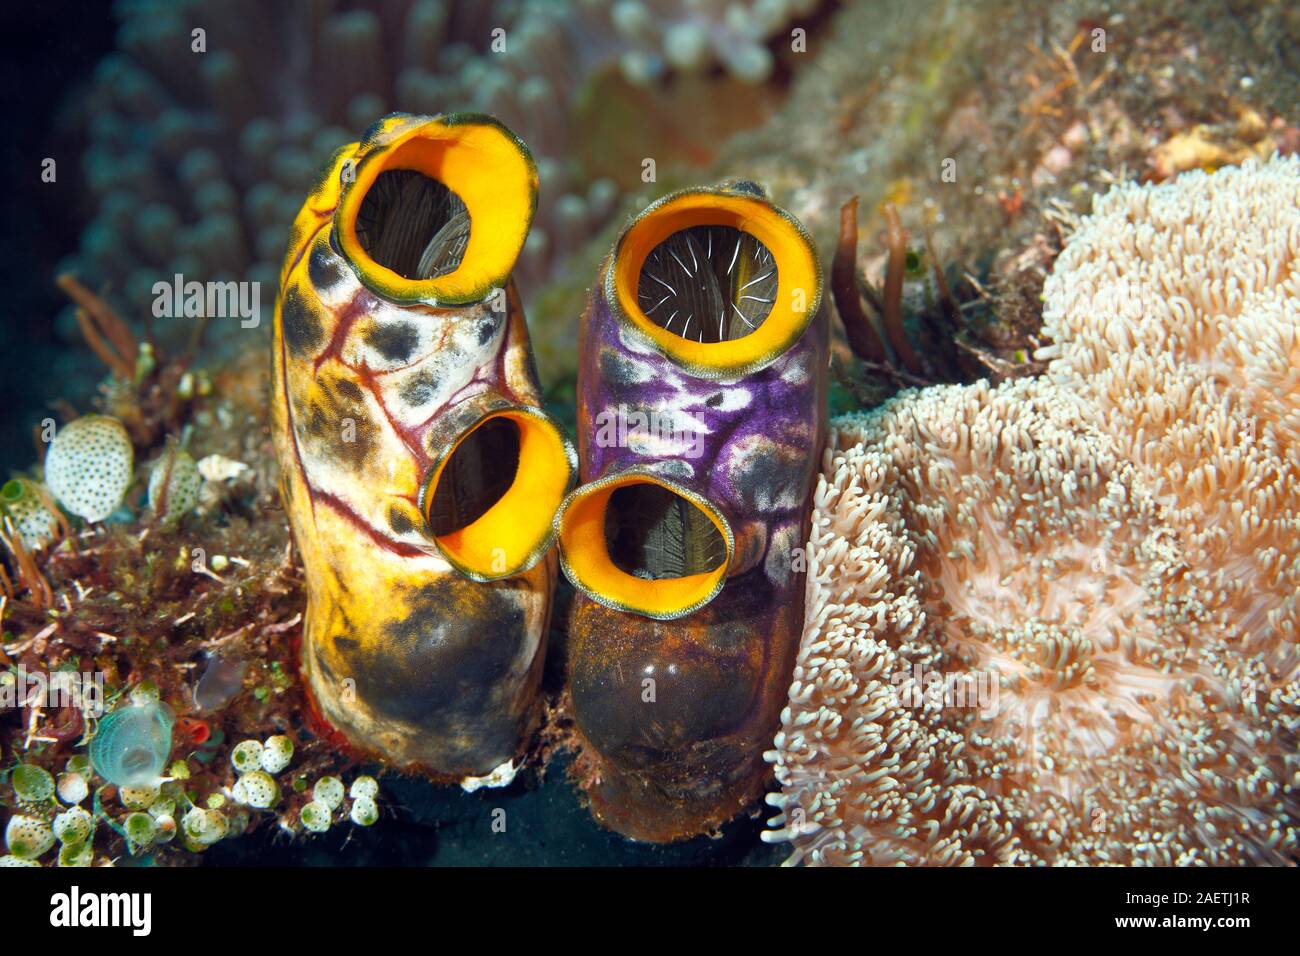 Ox Heart Ascidian, also known as Gold-mouth Sea Squirt or Ink-spot Sea Squirt, Polycarpa aurata. Tulamben, Bali, Indonesia. Bali Sea, Indian Ocean Stock Photo